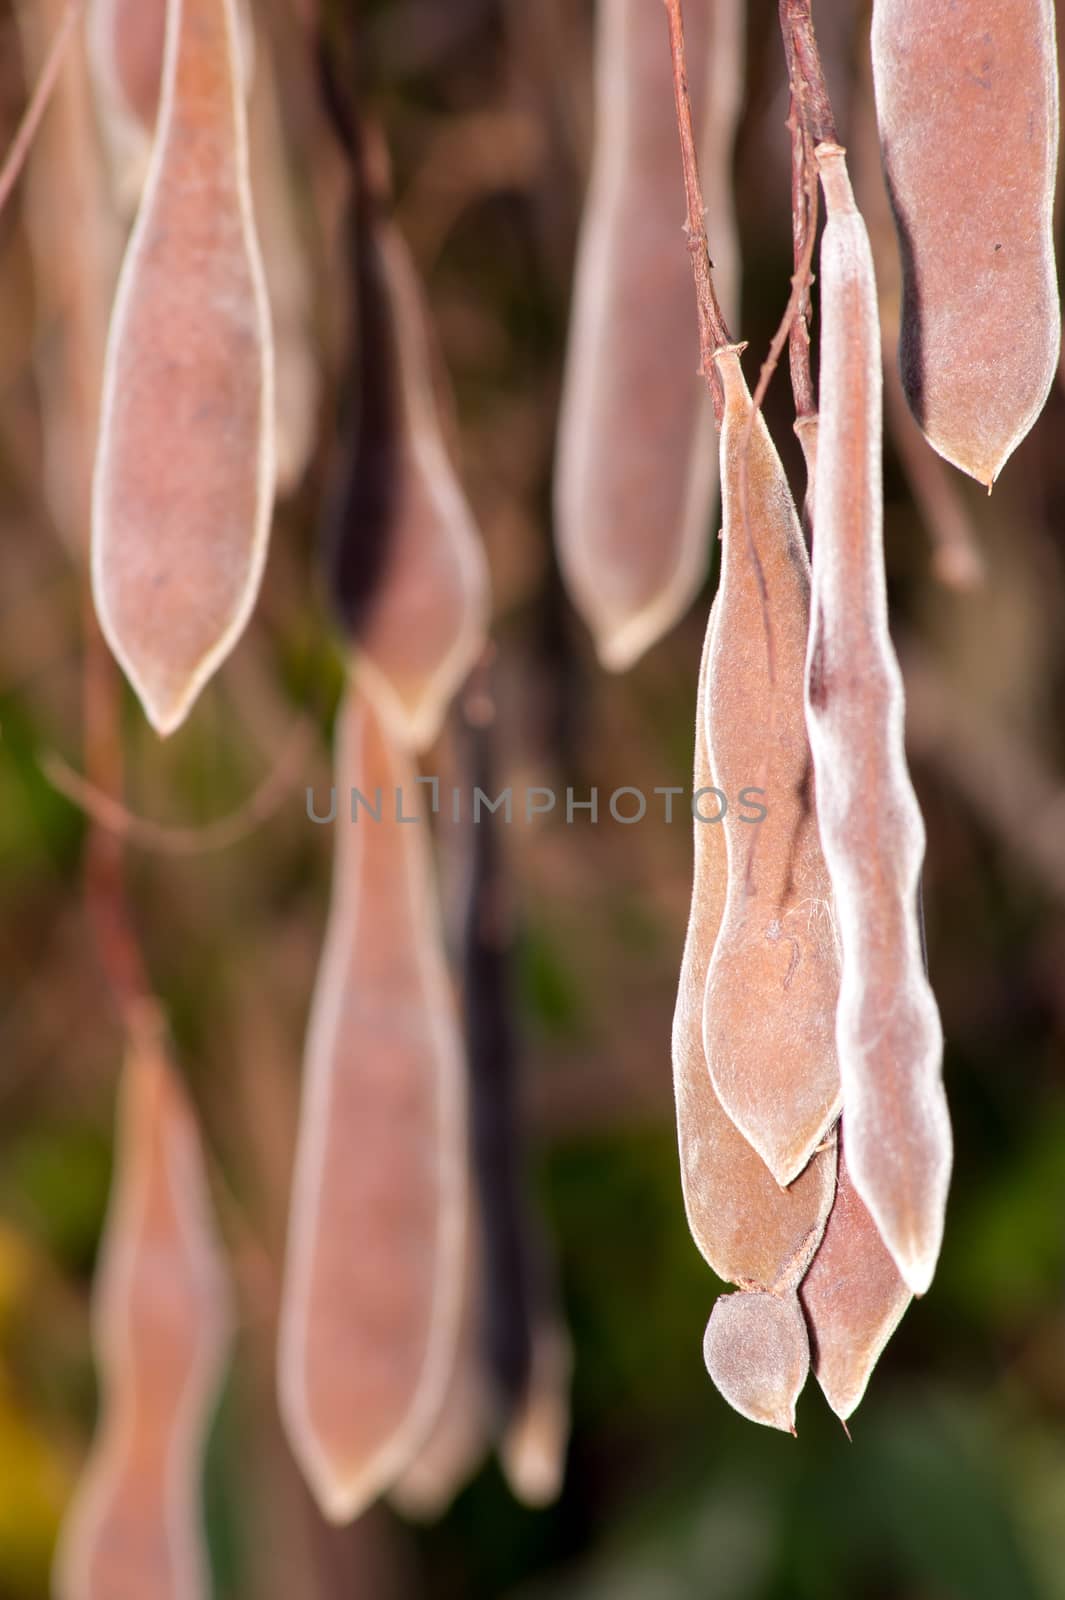 In autumn, the ripe seed of wisteria hanging in the trees.